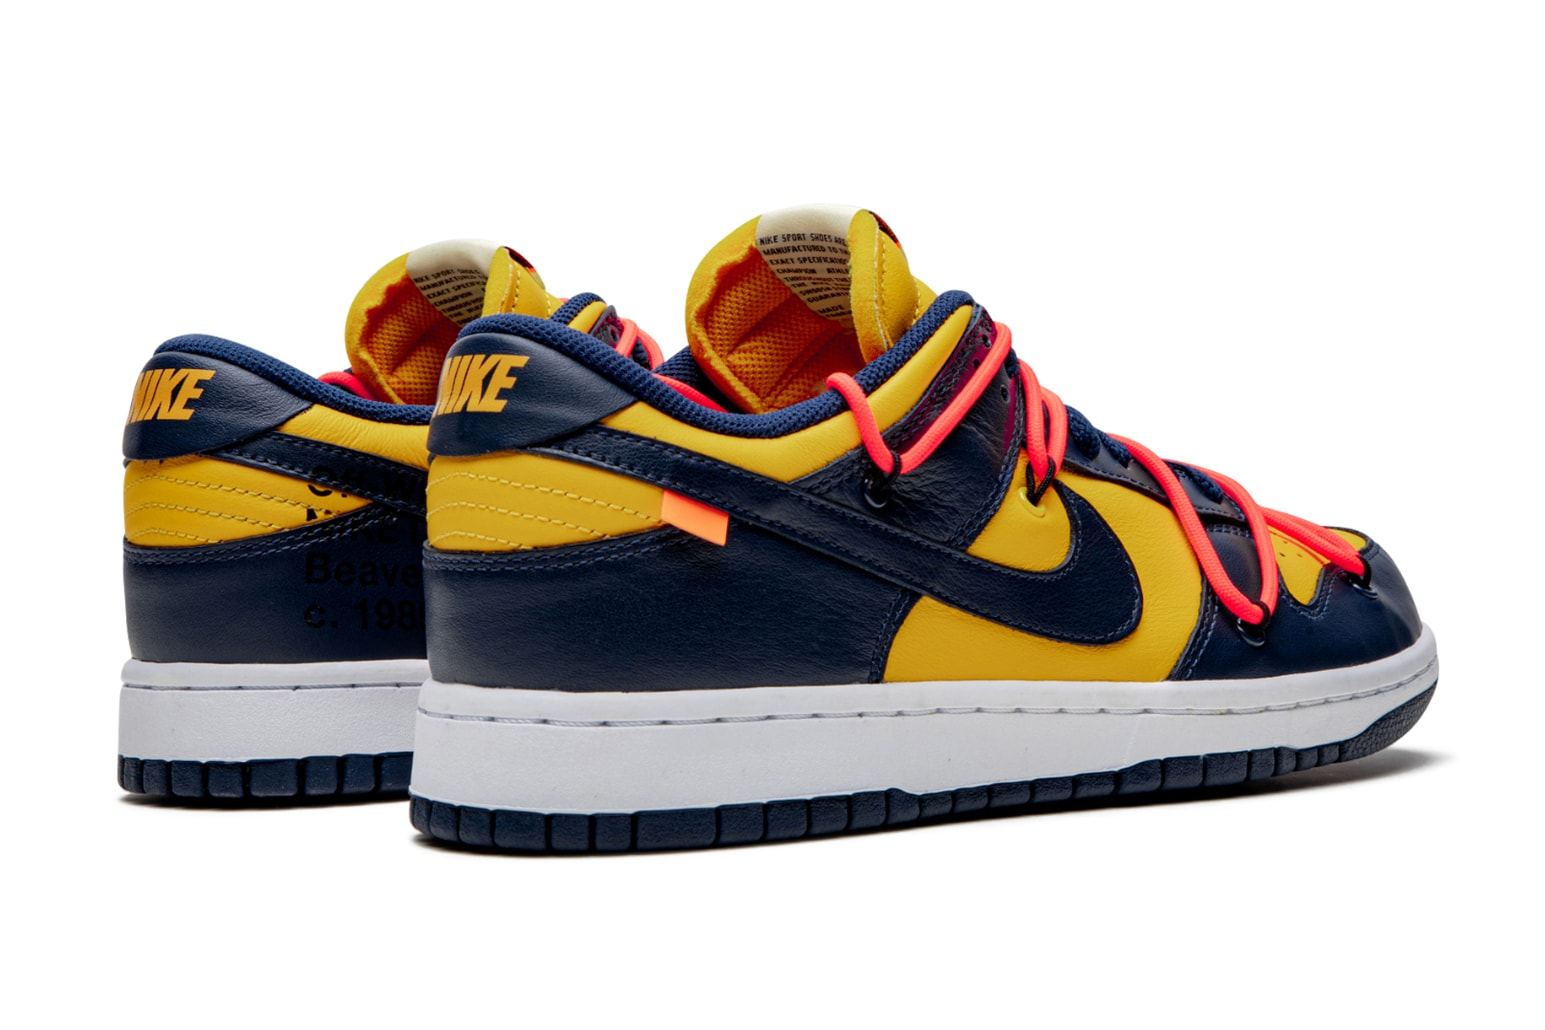 Off-White™ x Nike SB Dunk Low "University Gold" stadium goods virgil abloh closer look better detailed collaborations release info yellow blue navy